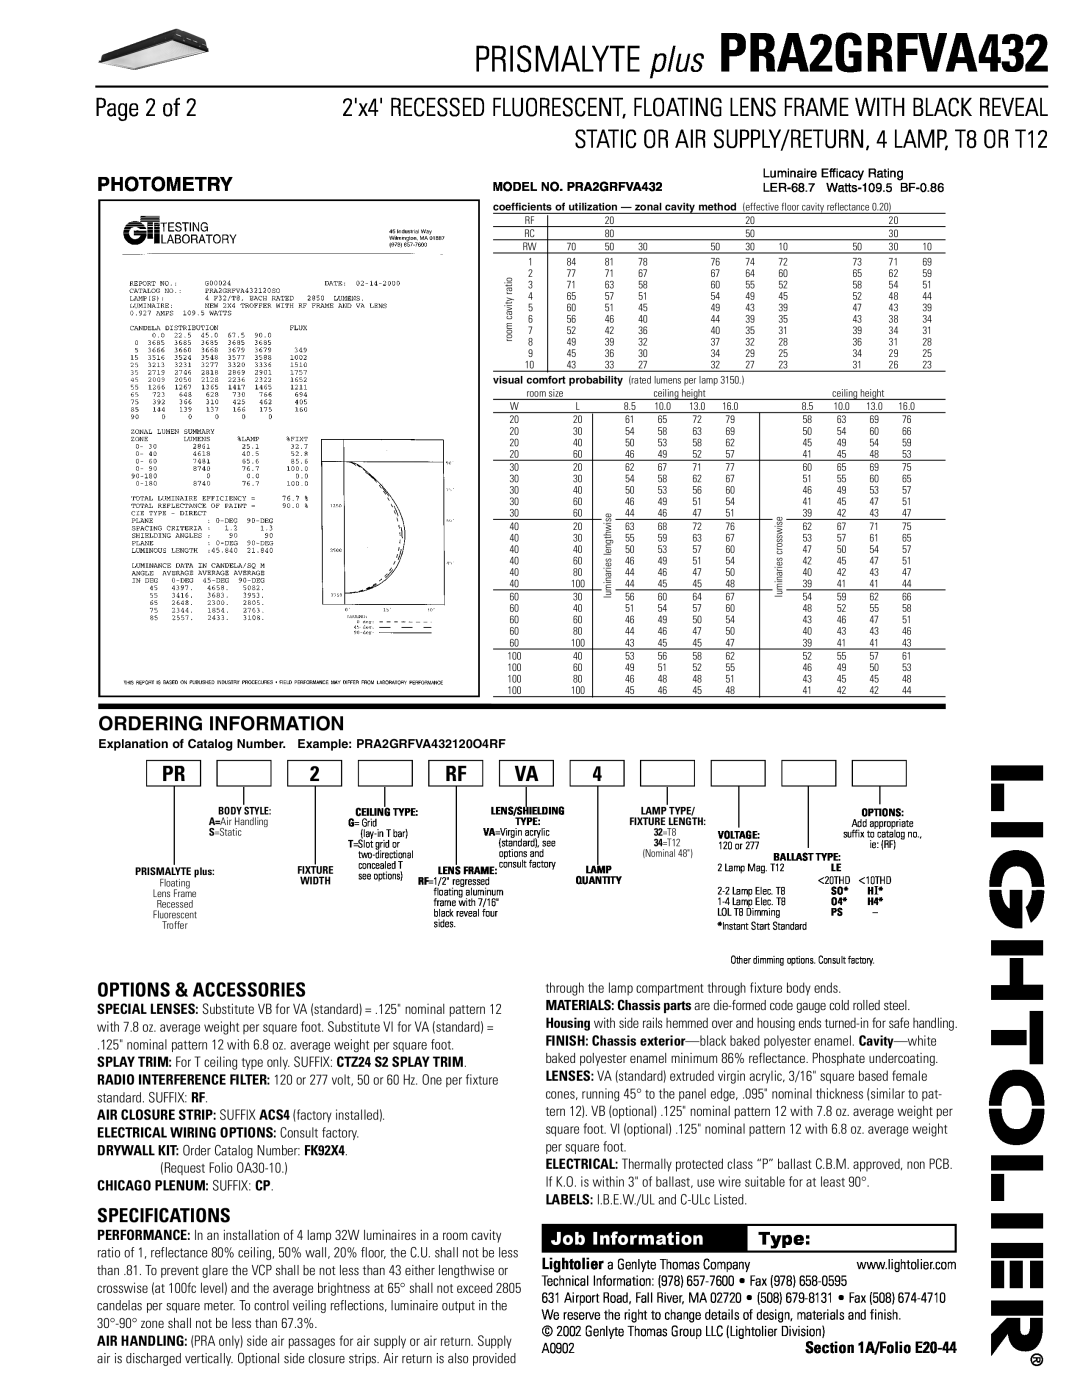 Lightolier PRA2GRFVA432 dimensions Page 2 of, Photometry, Ordering Information, Options & Accessories, Specifications, Type 